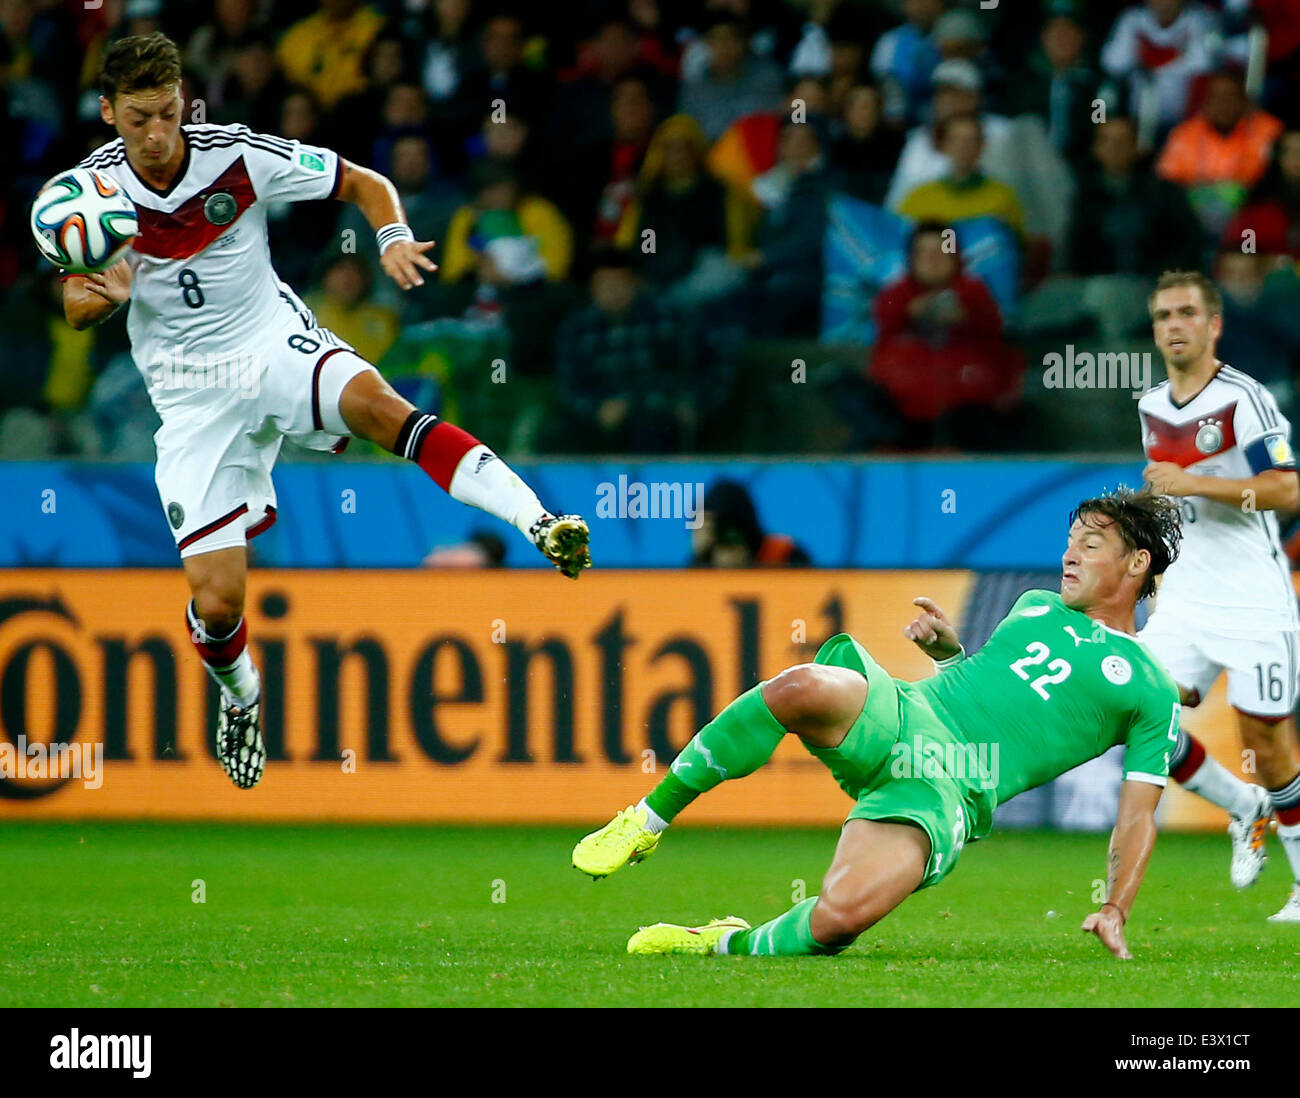 Porto Alegre, Brazil. 30th June, 2014. Germany's Mesut Ozil vies with Algeria's Mehdi Mostefa during a Round of 16 match between Germany and Algeria of 2014 FIFA World Cup at the Estadio Beira-Rio Stadium in Porto Alegre, Brazil, on June 30, 2014. Credit:  Chen Jianli/Xinhua/Alamy Live News Stock Photo